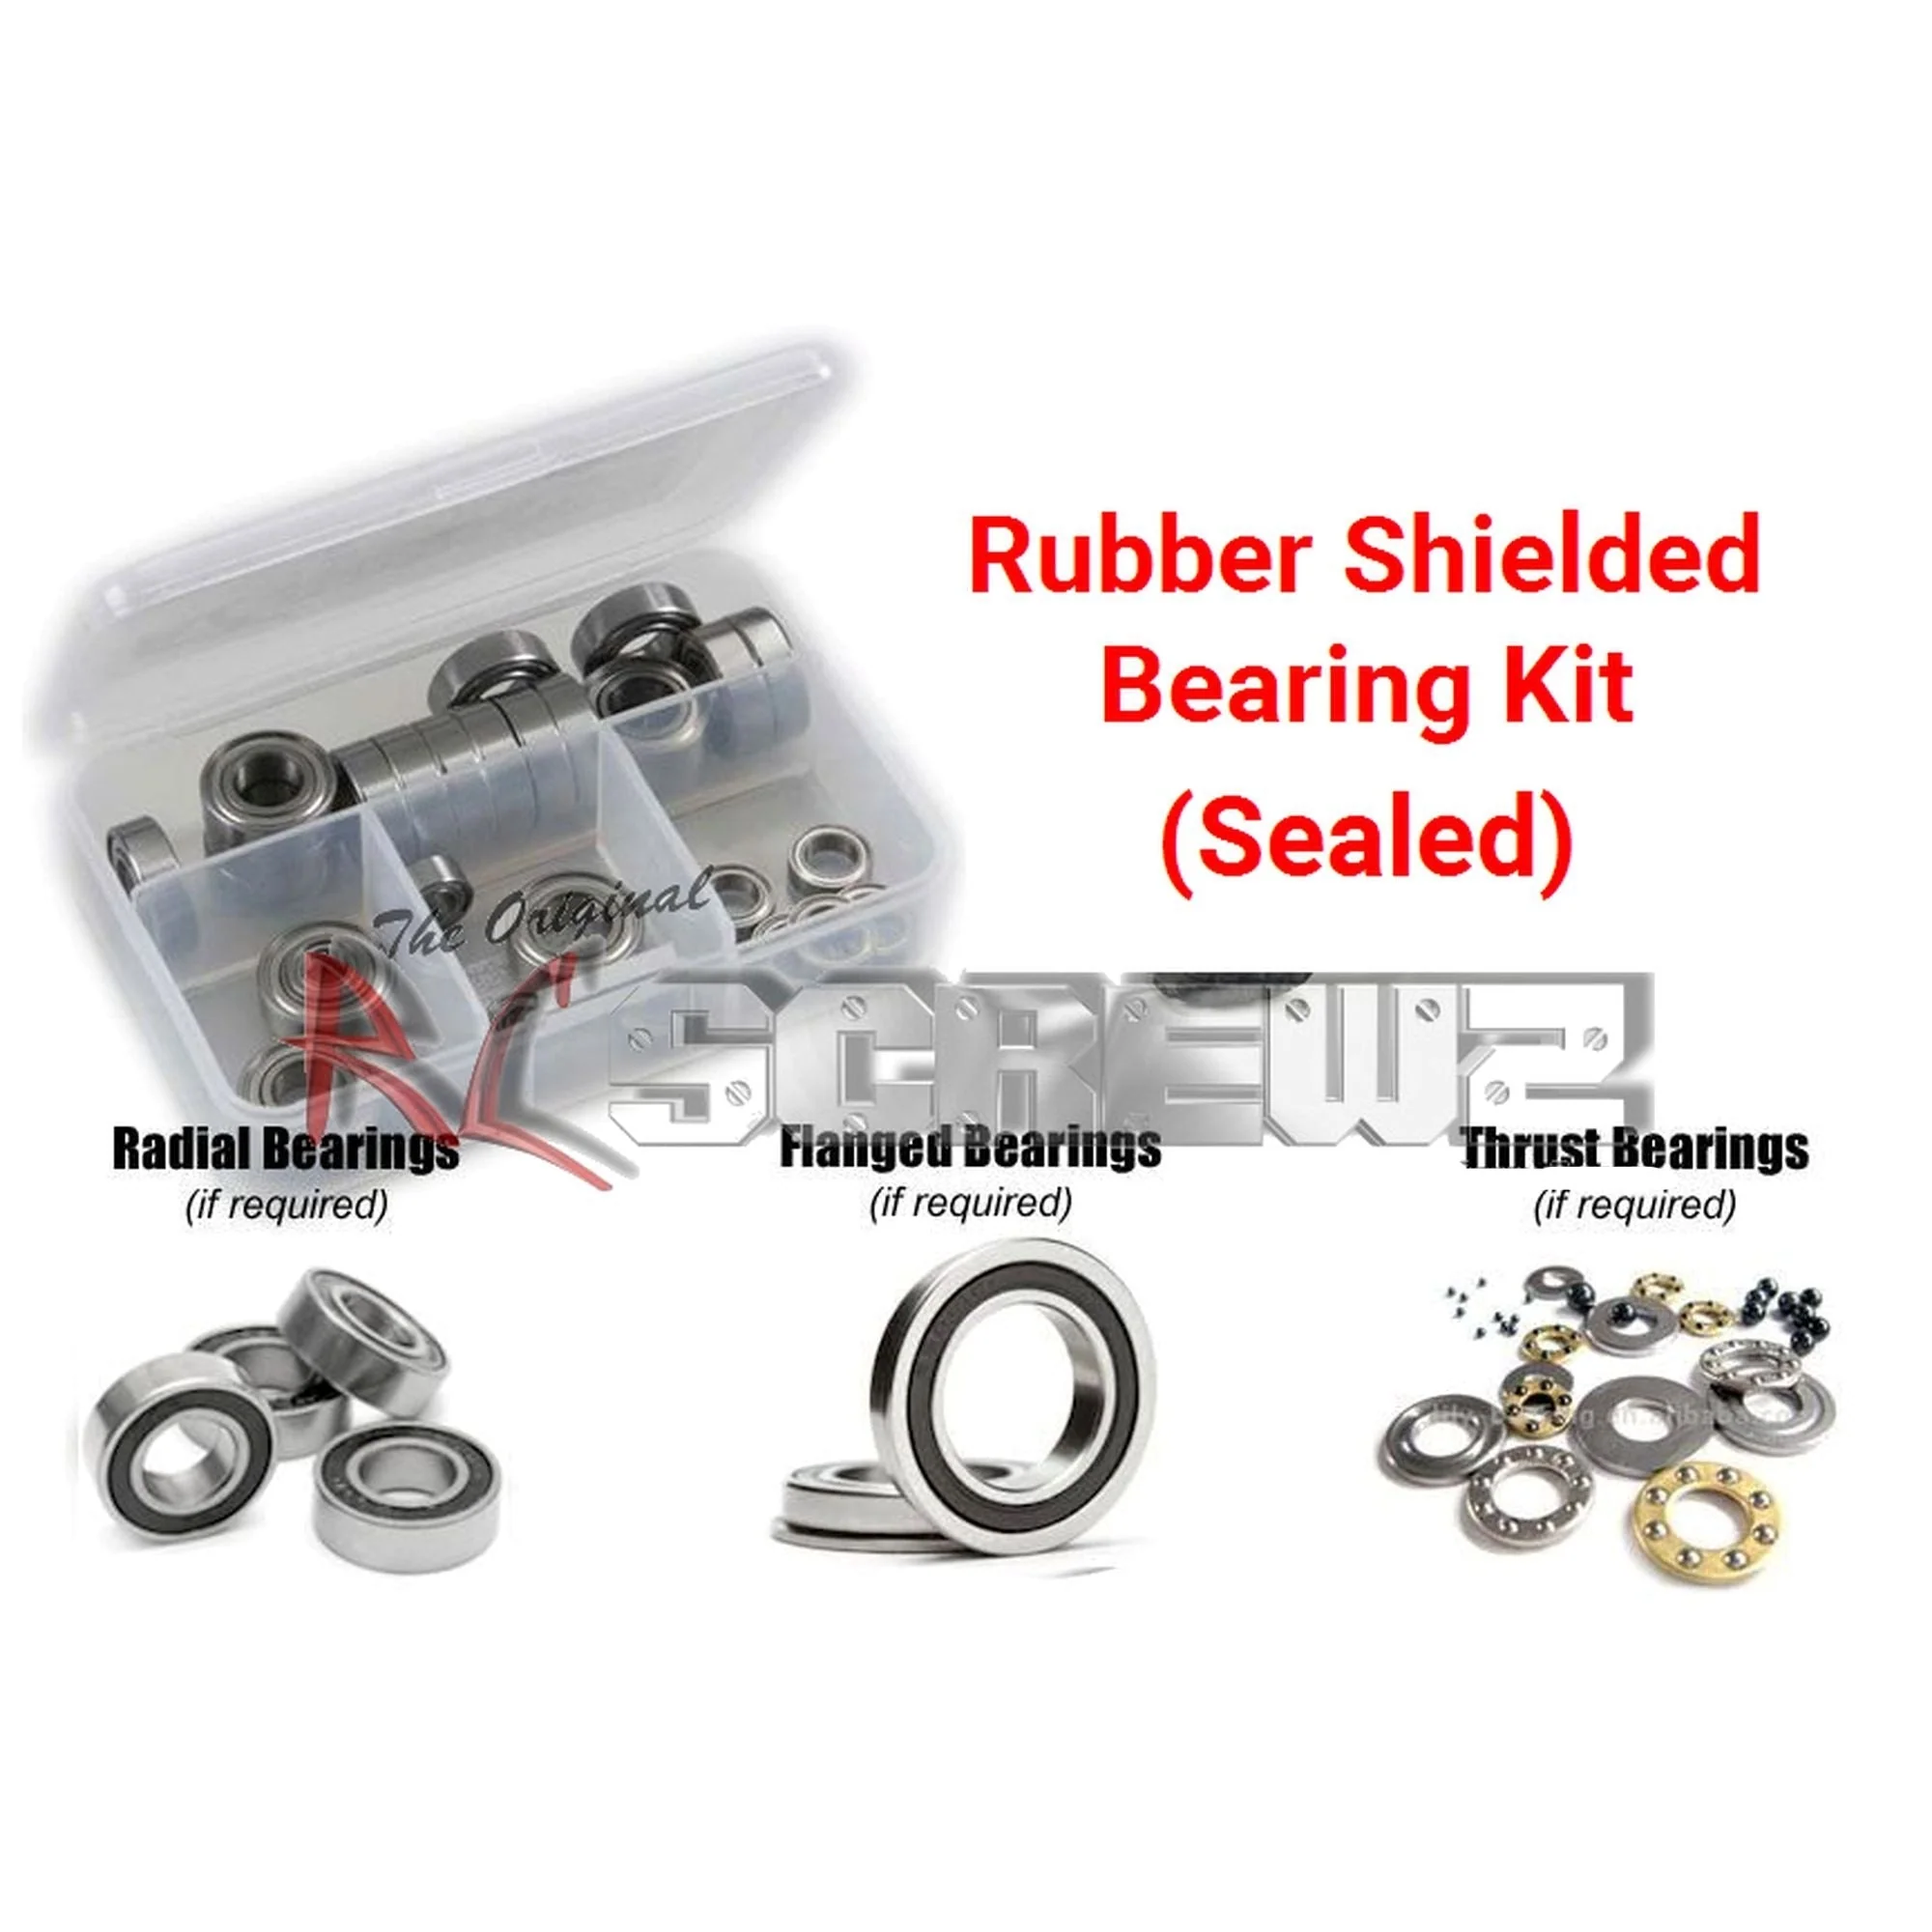 RCScrewZ Rubber Shielded Bearing Kit ass054r for Associated Rival MT 1/8 #20511 - Picture 1 of 12